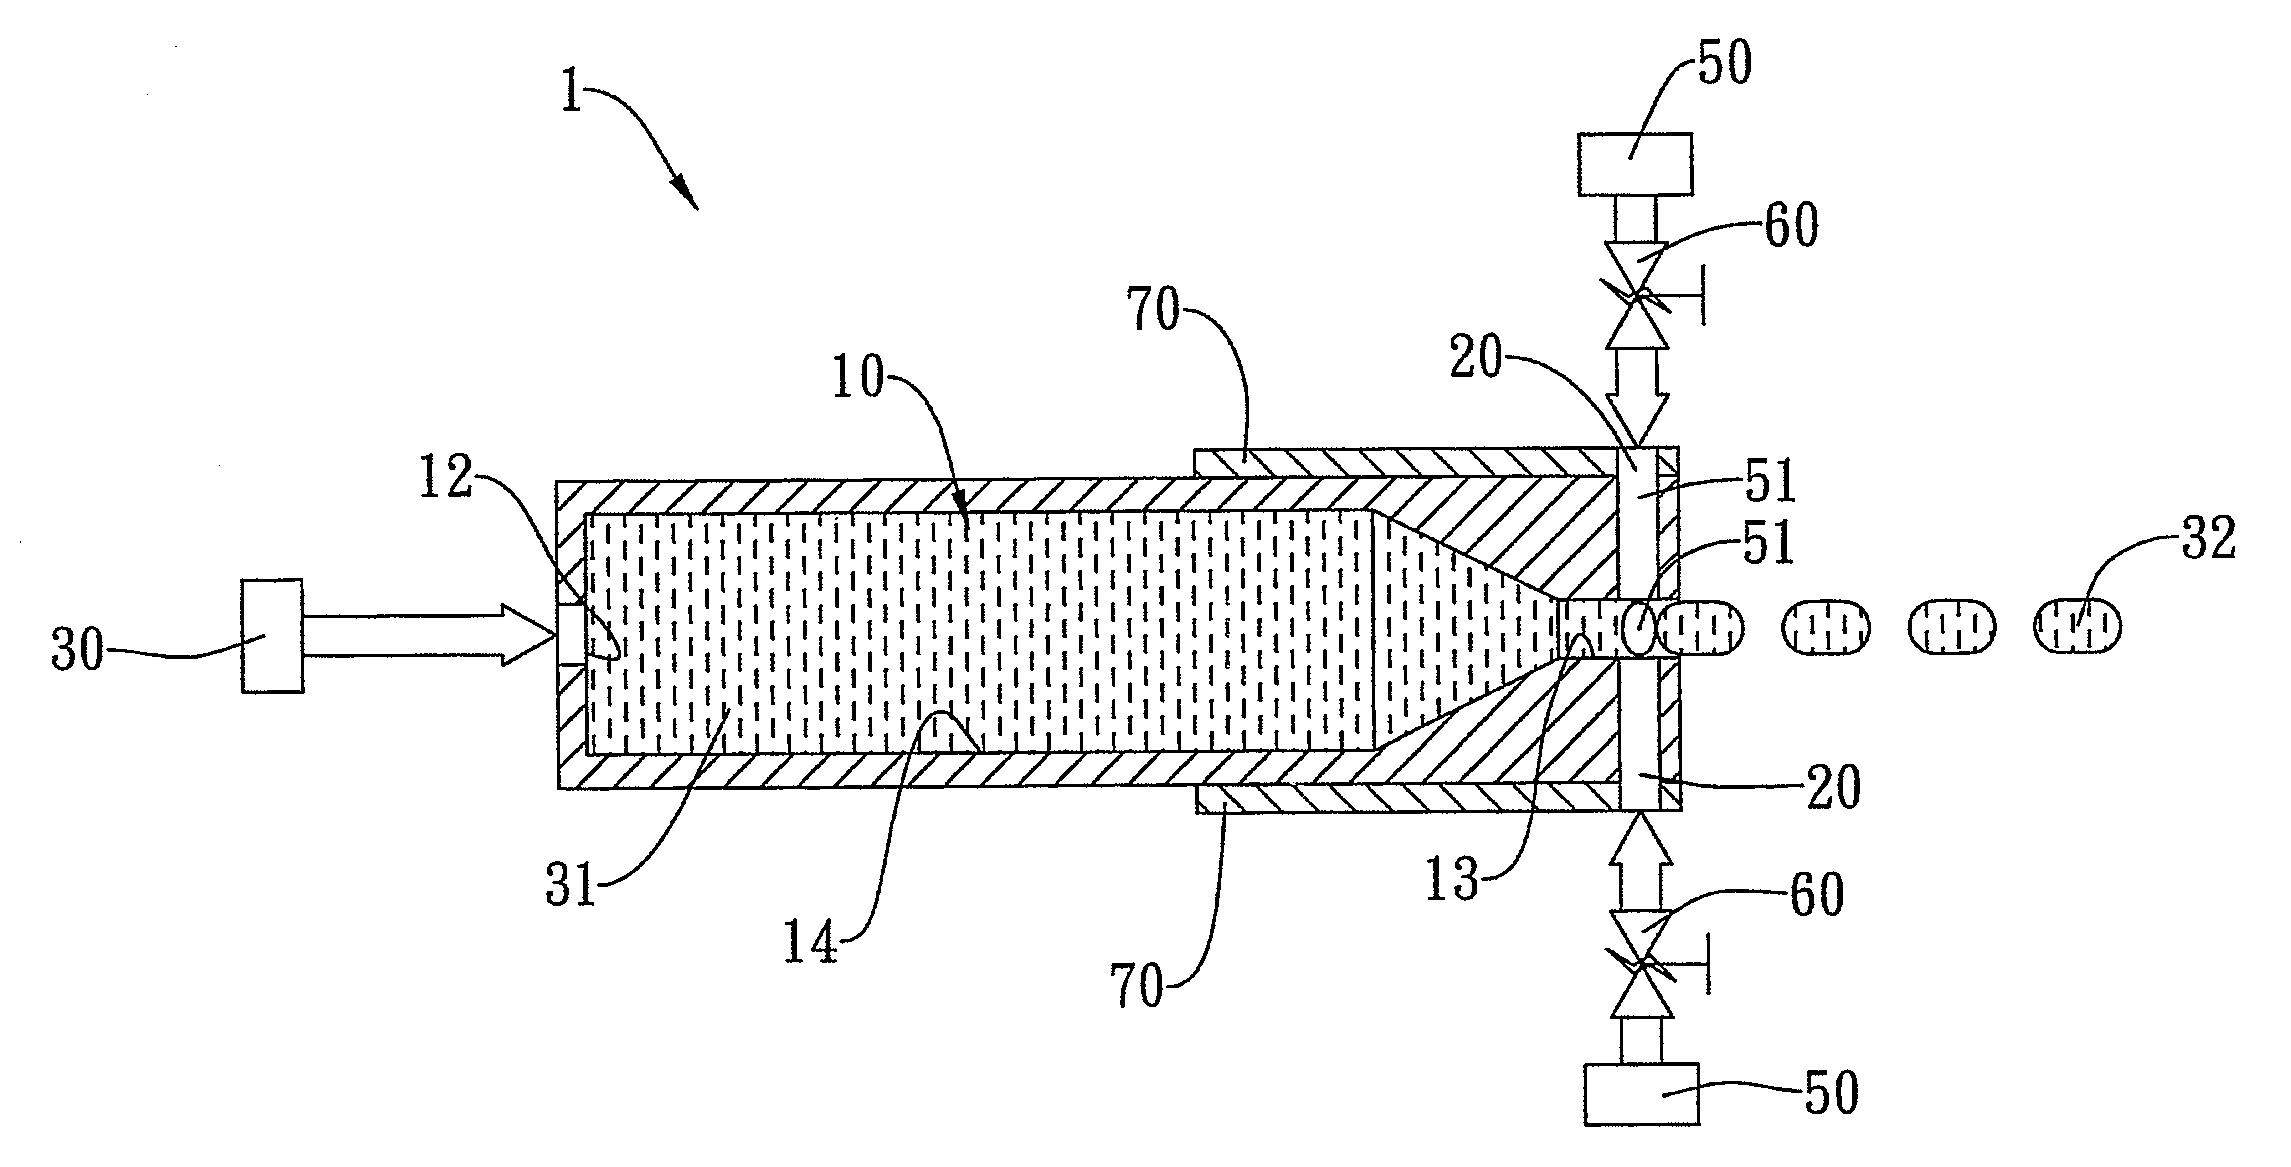 Droplet ejection device for a highly viscous liquid